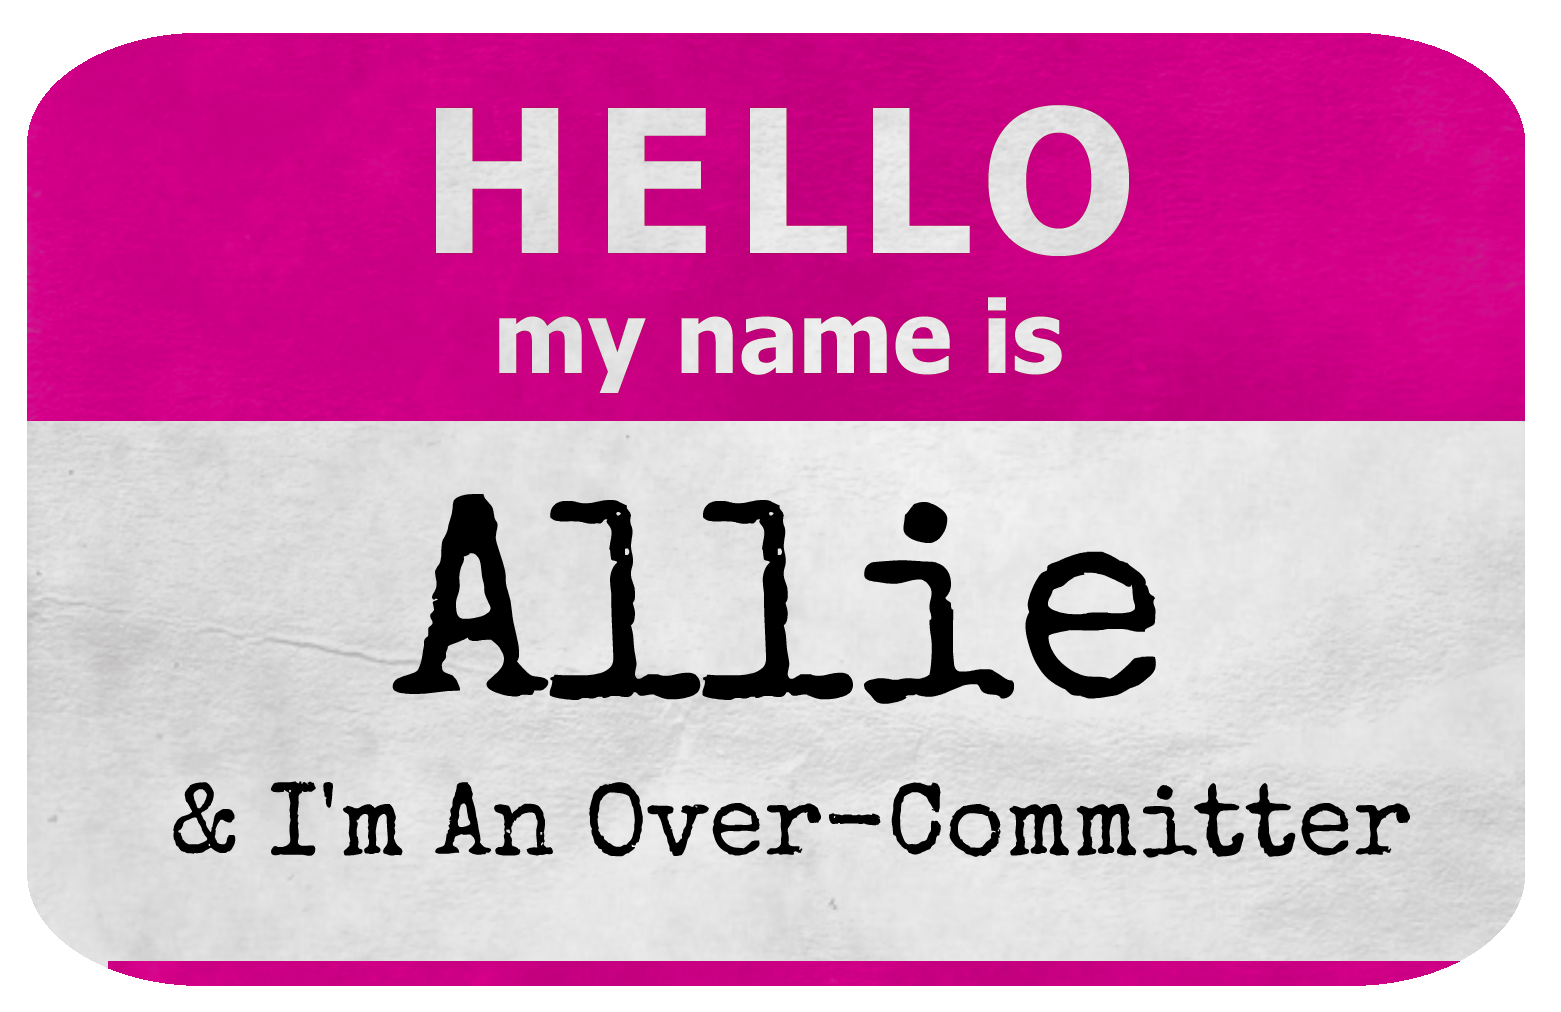 Hello my name is this is